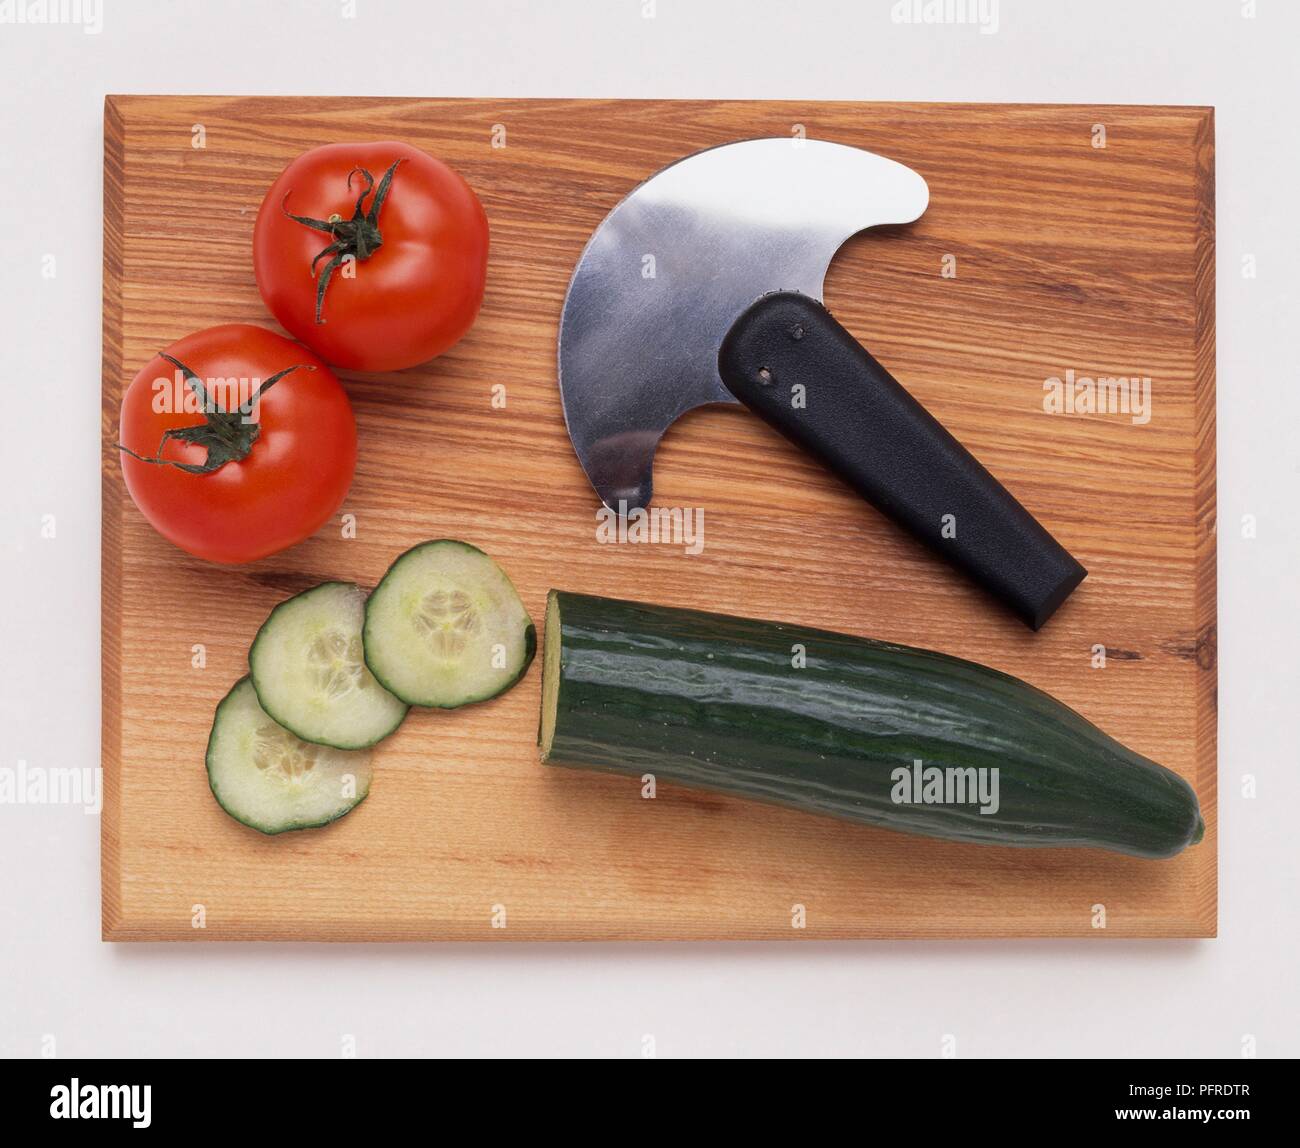 https://c8.alamy.com/comp/PFRDTR/kitchen-knife-with-half-moon-blade-on-chopping-board-with-tomatoes-and-cucumber-PFRDTR.jpg